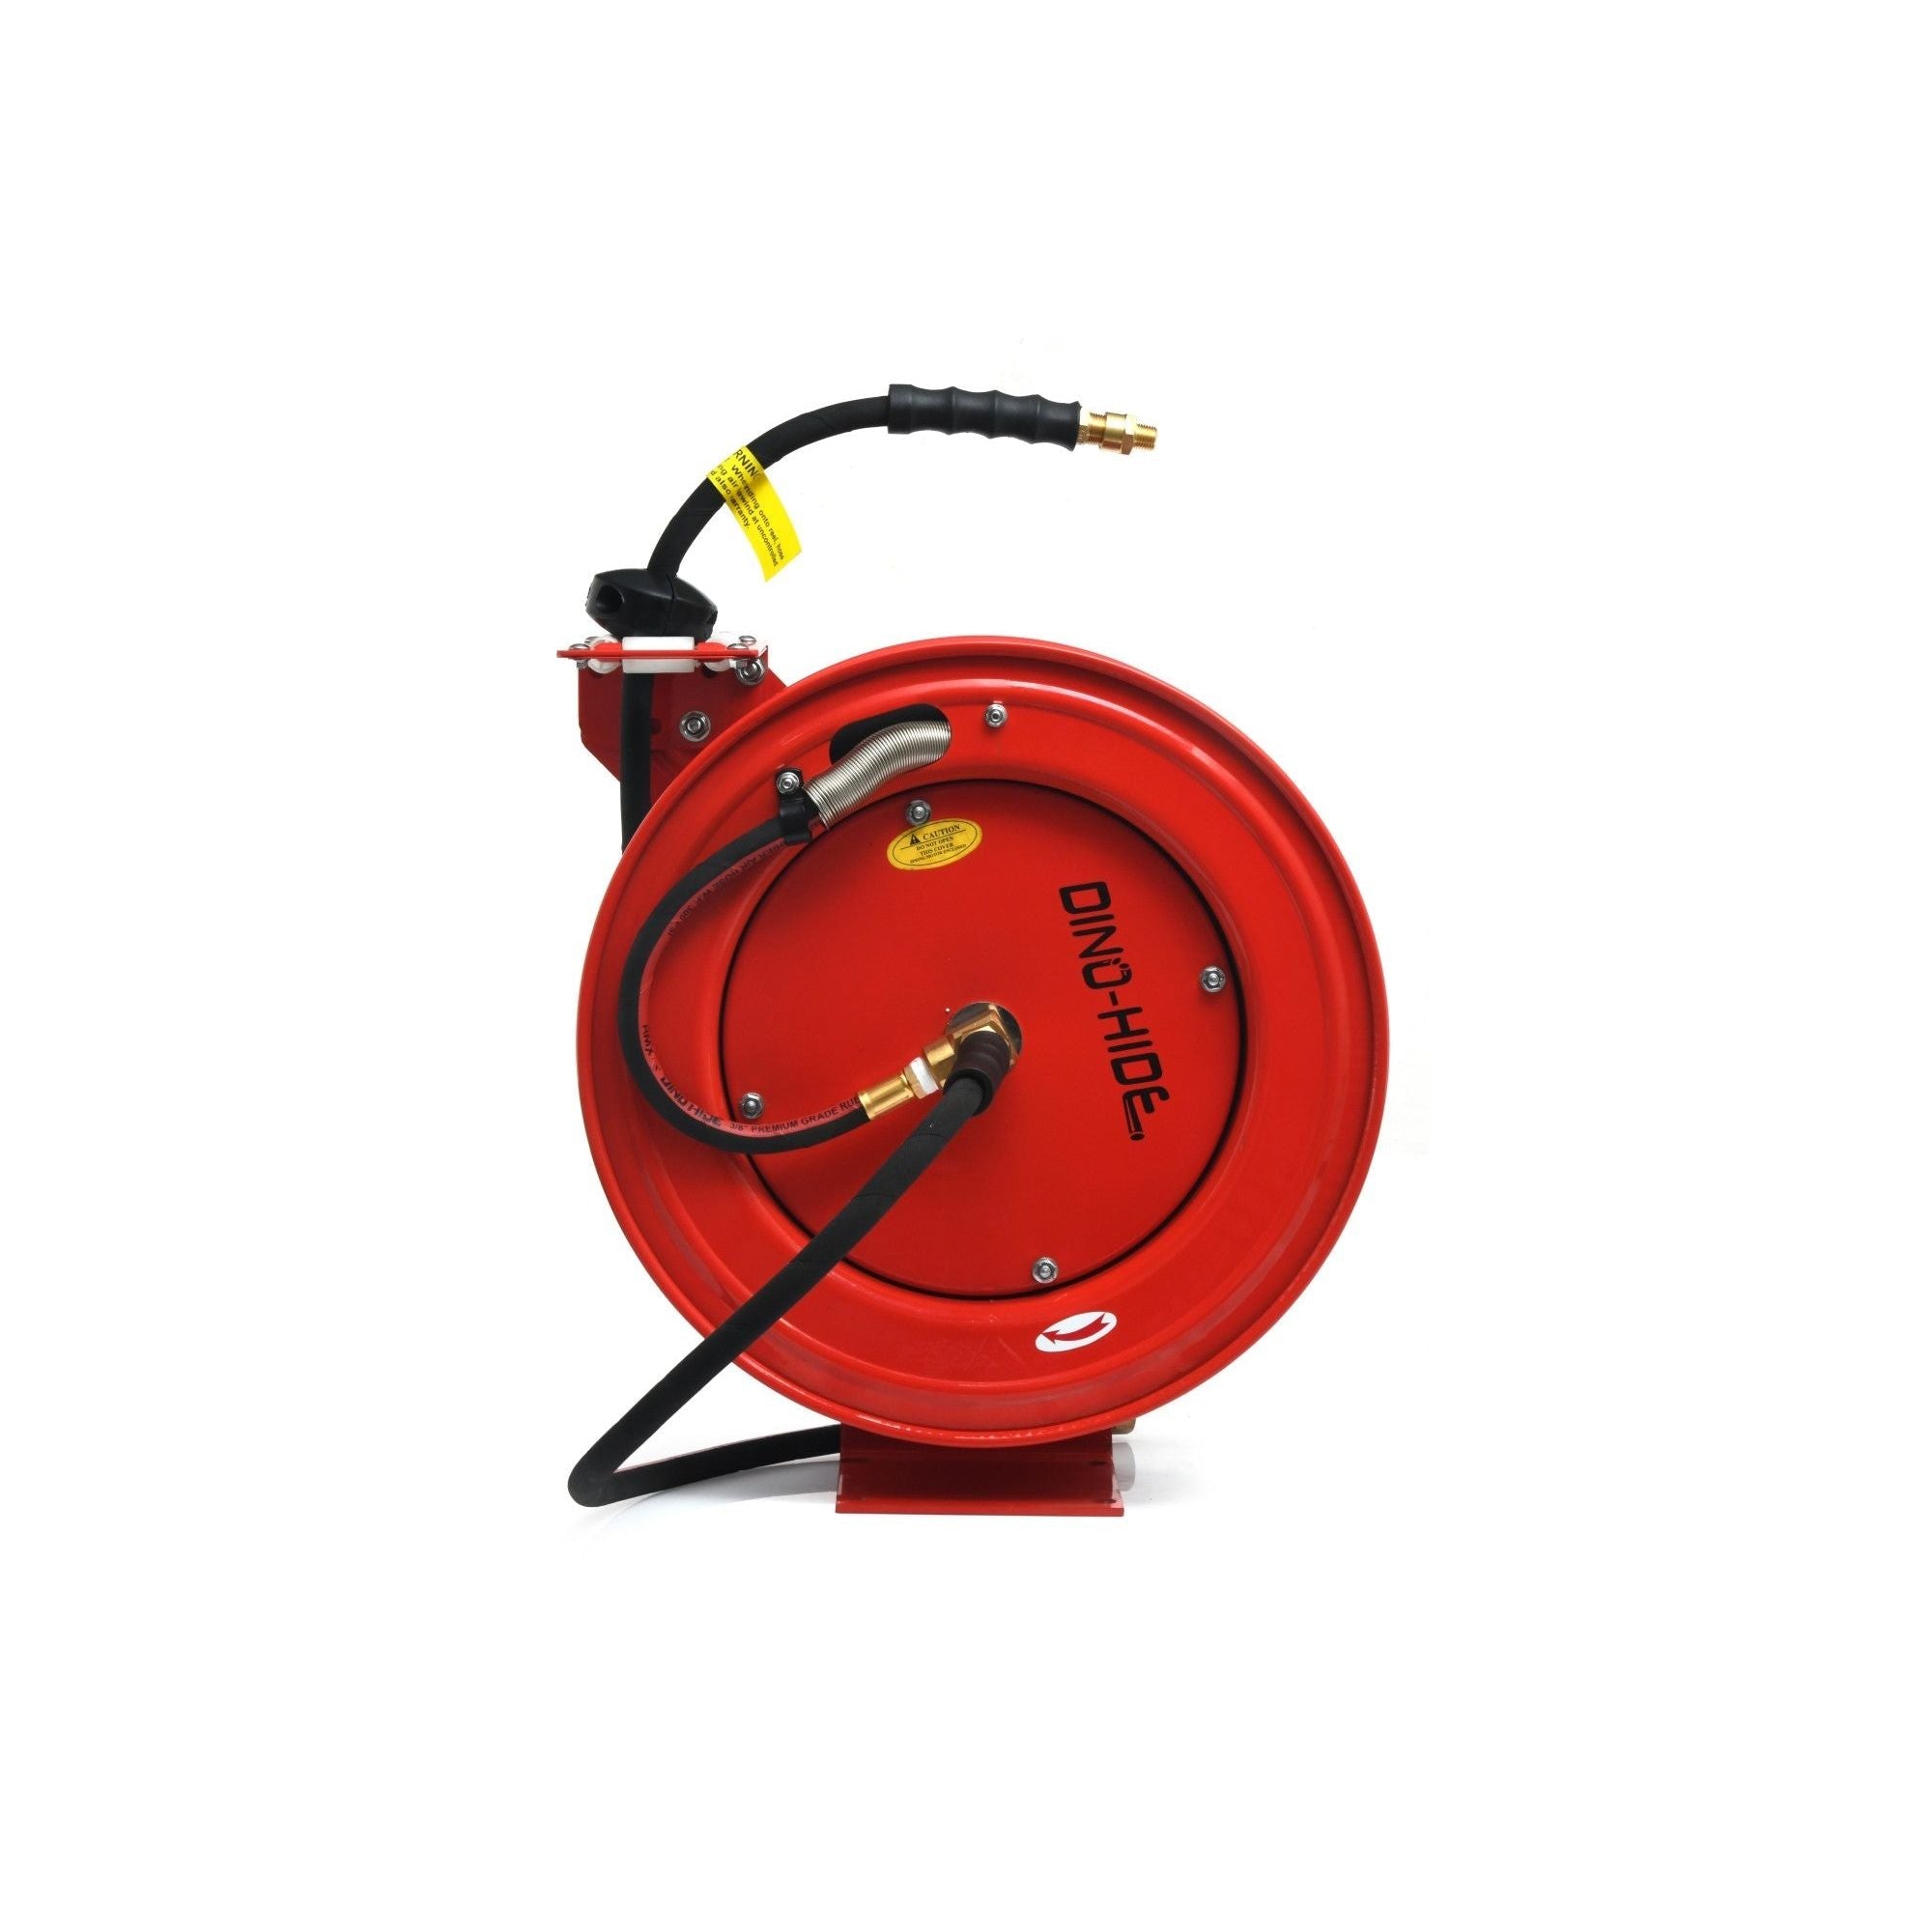  BluBird RBR3825 3/8 x 25' Metal Retractable Air Hose Reel -  Rubber Hose - 3' Lead-in Hose, Red : Automotive